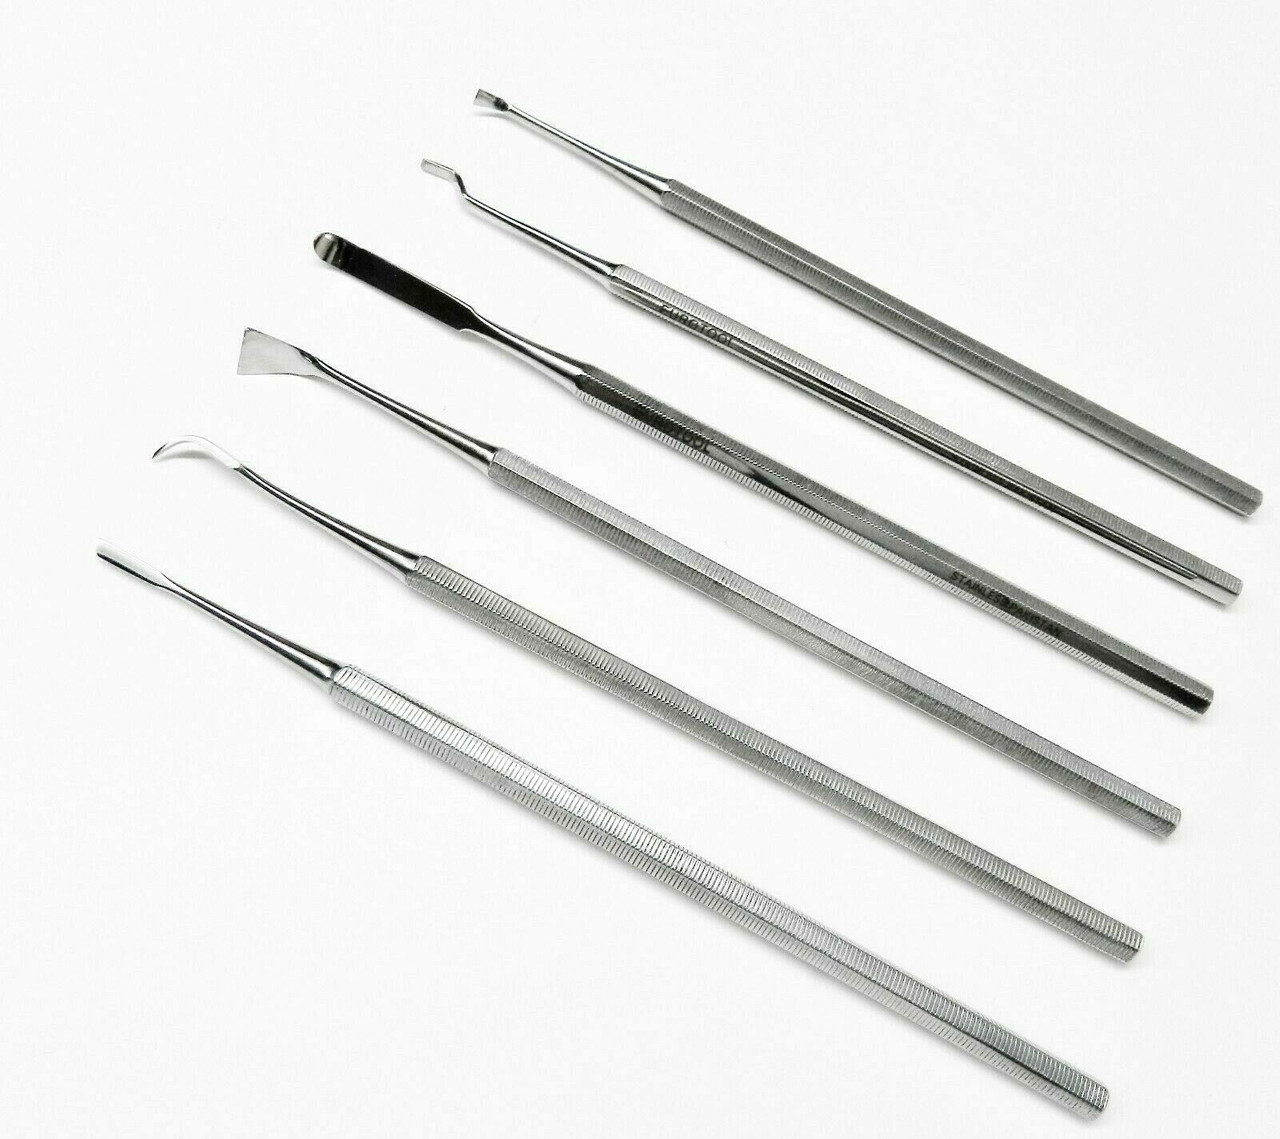 Wax Carver Tool Set of 6 Sharp Edge Cut Carvers for Wax Design Models